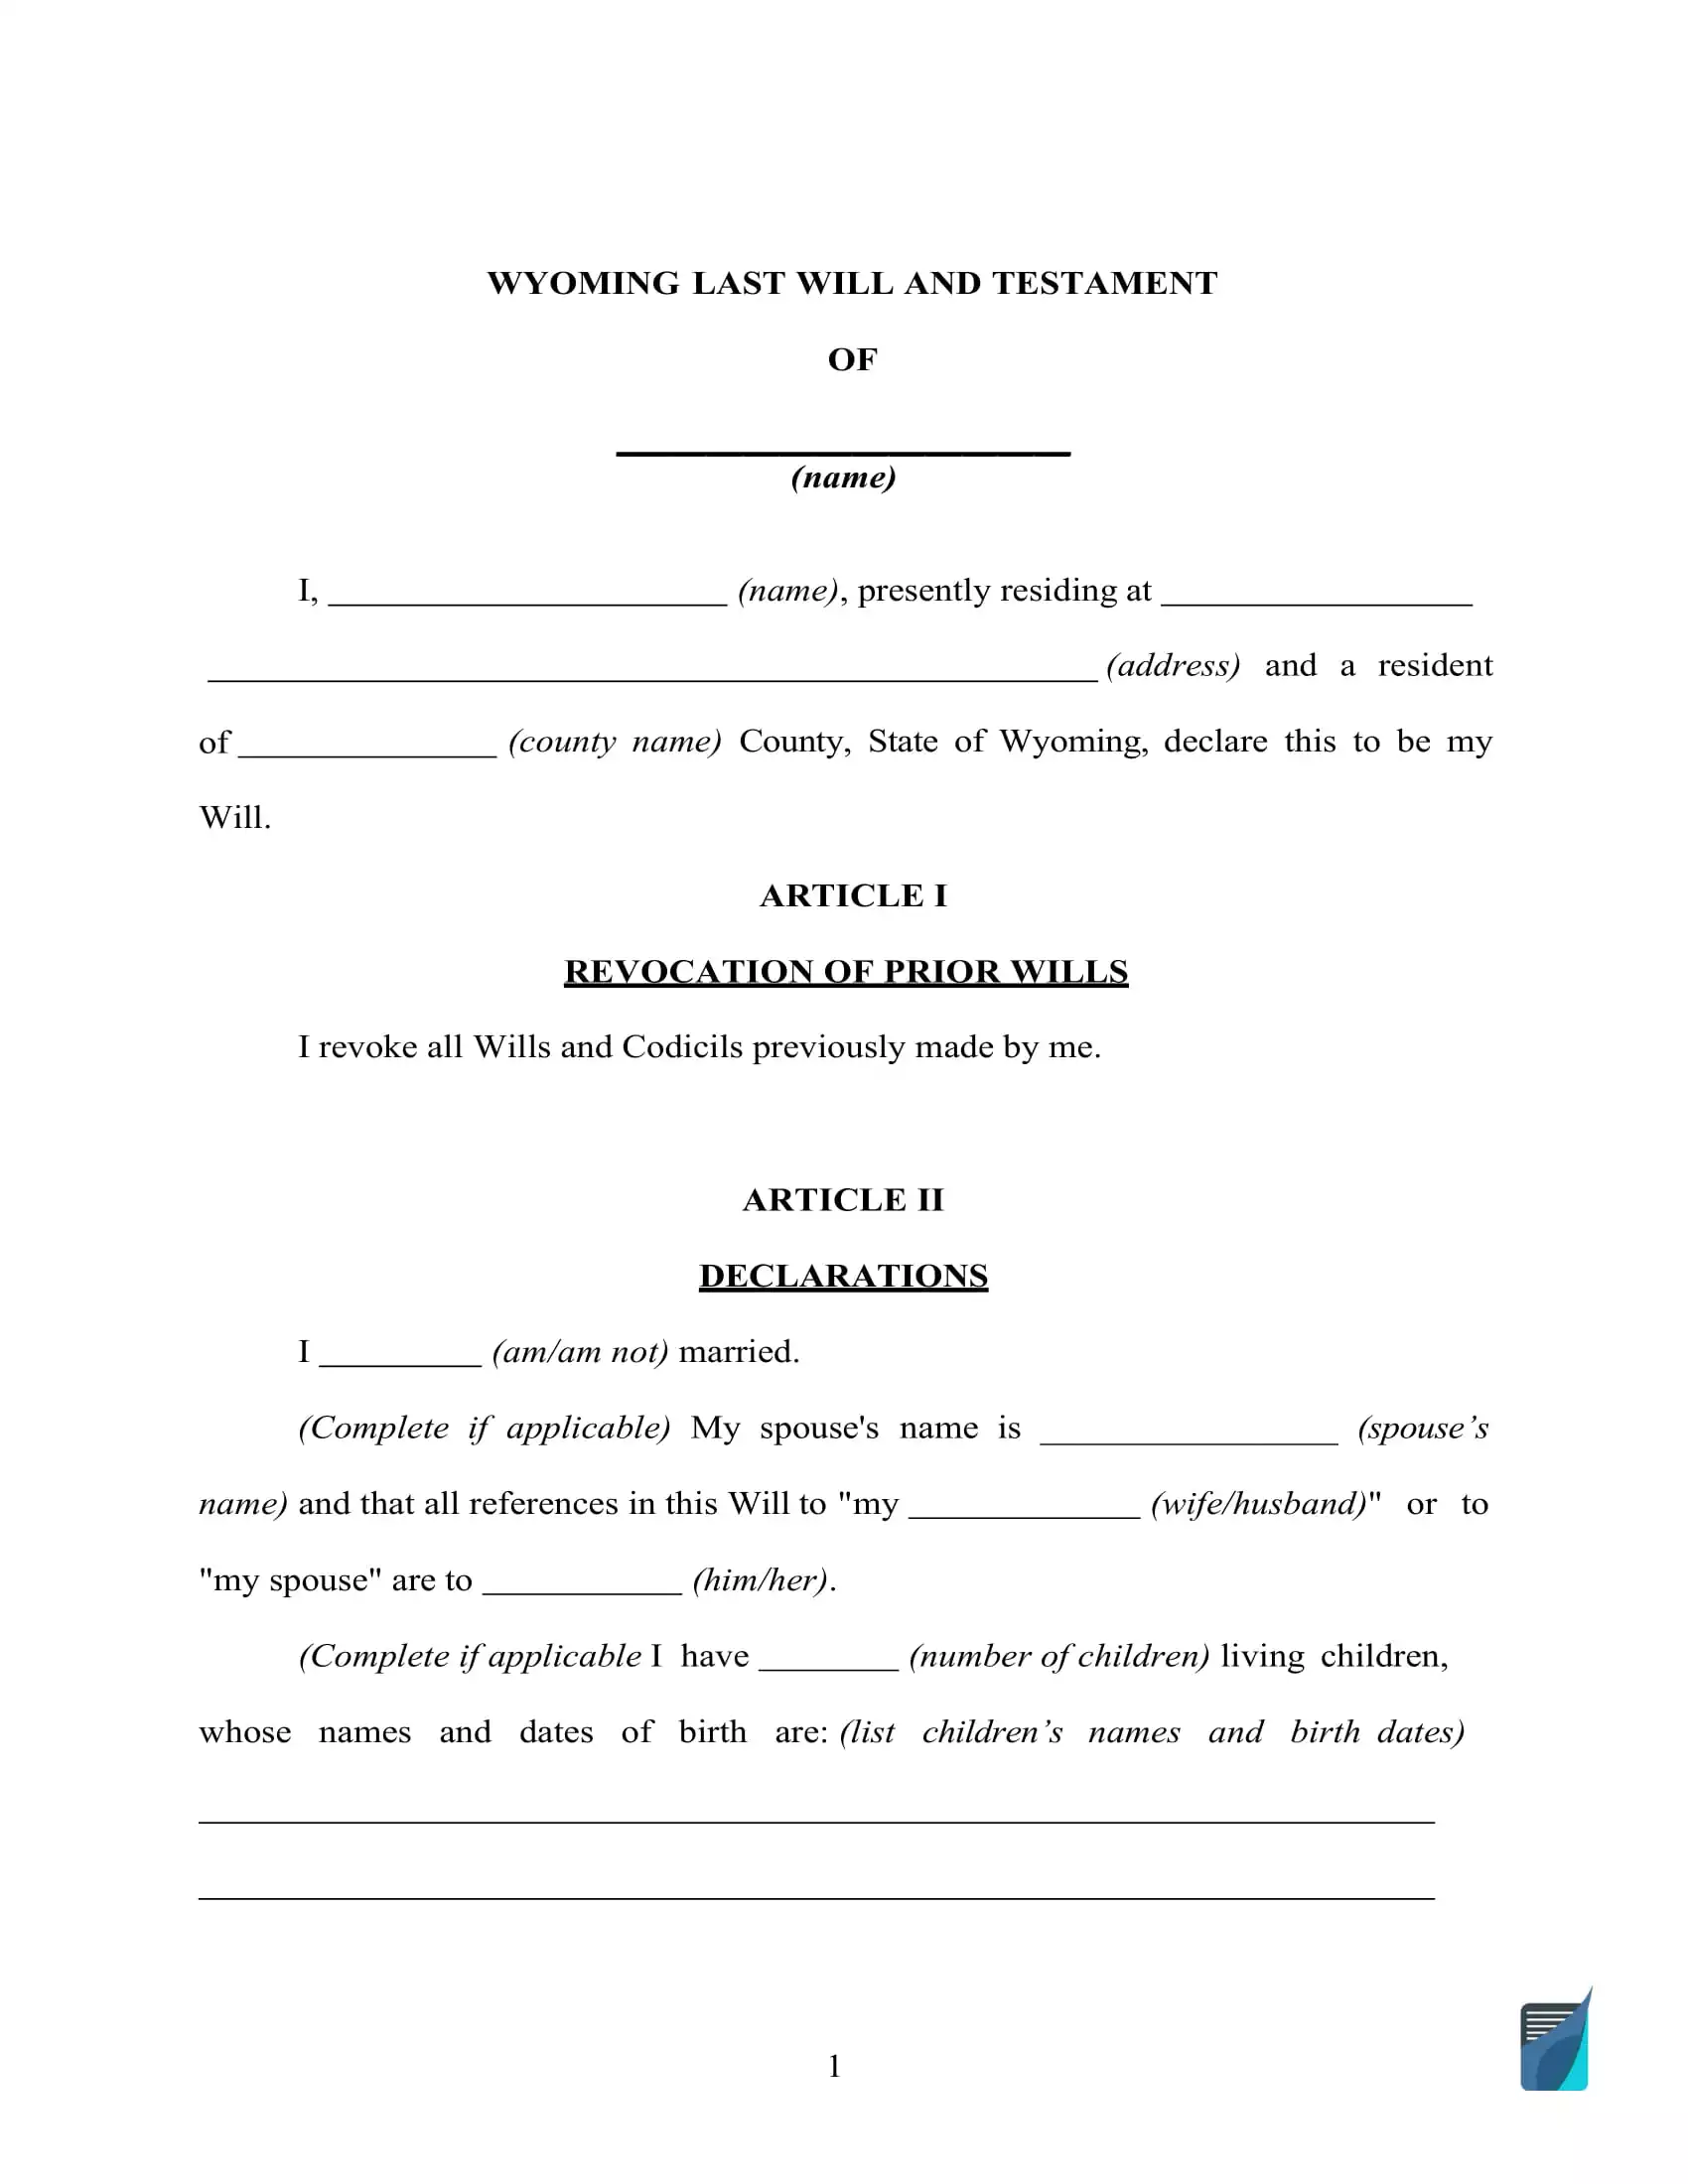 wyoming-last-will-and-testament-template